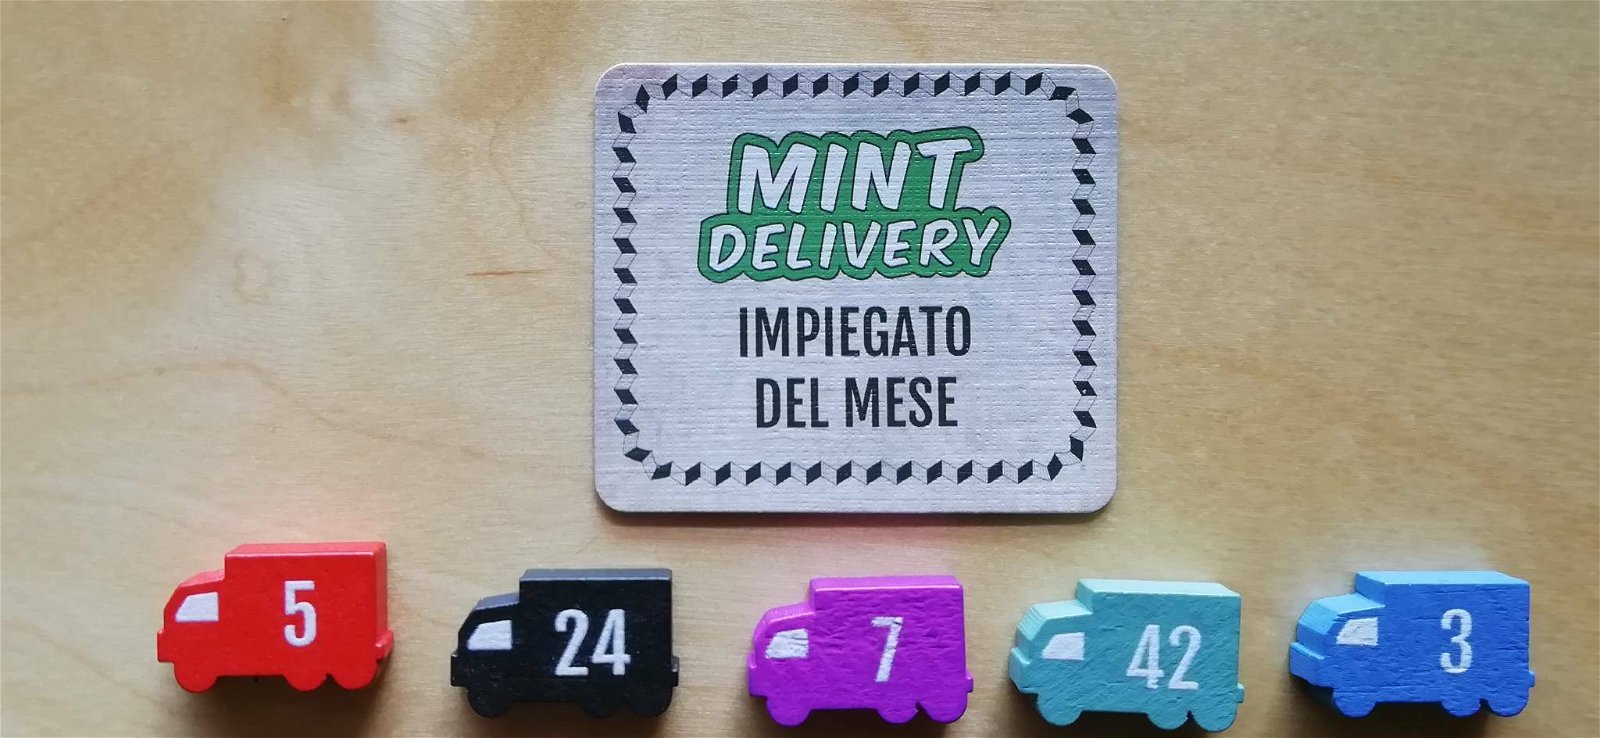 mint-delivery-178233.jpg